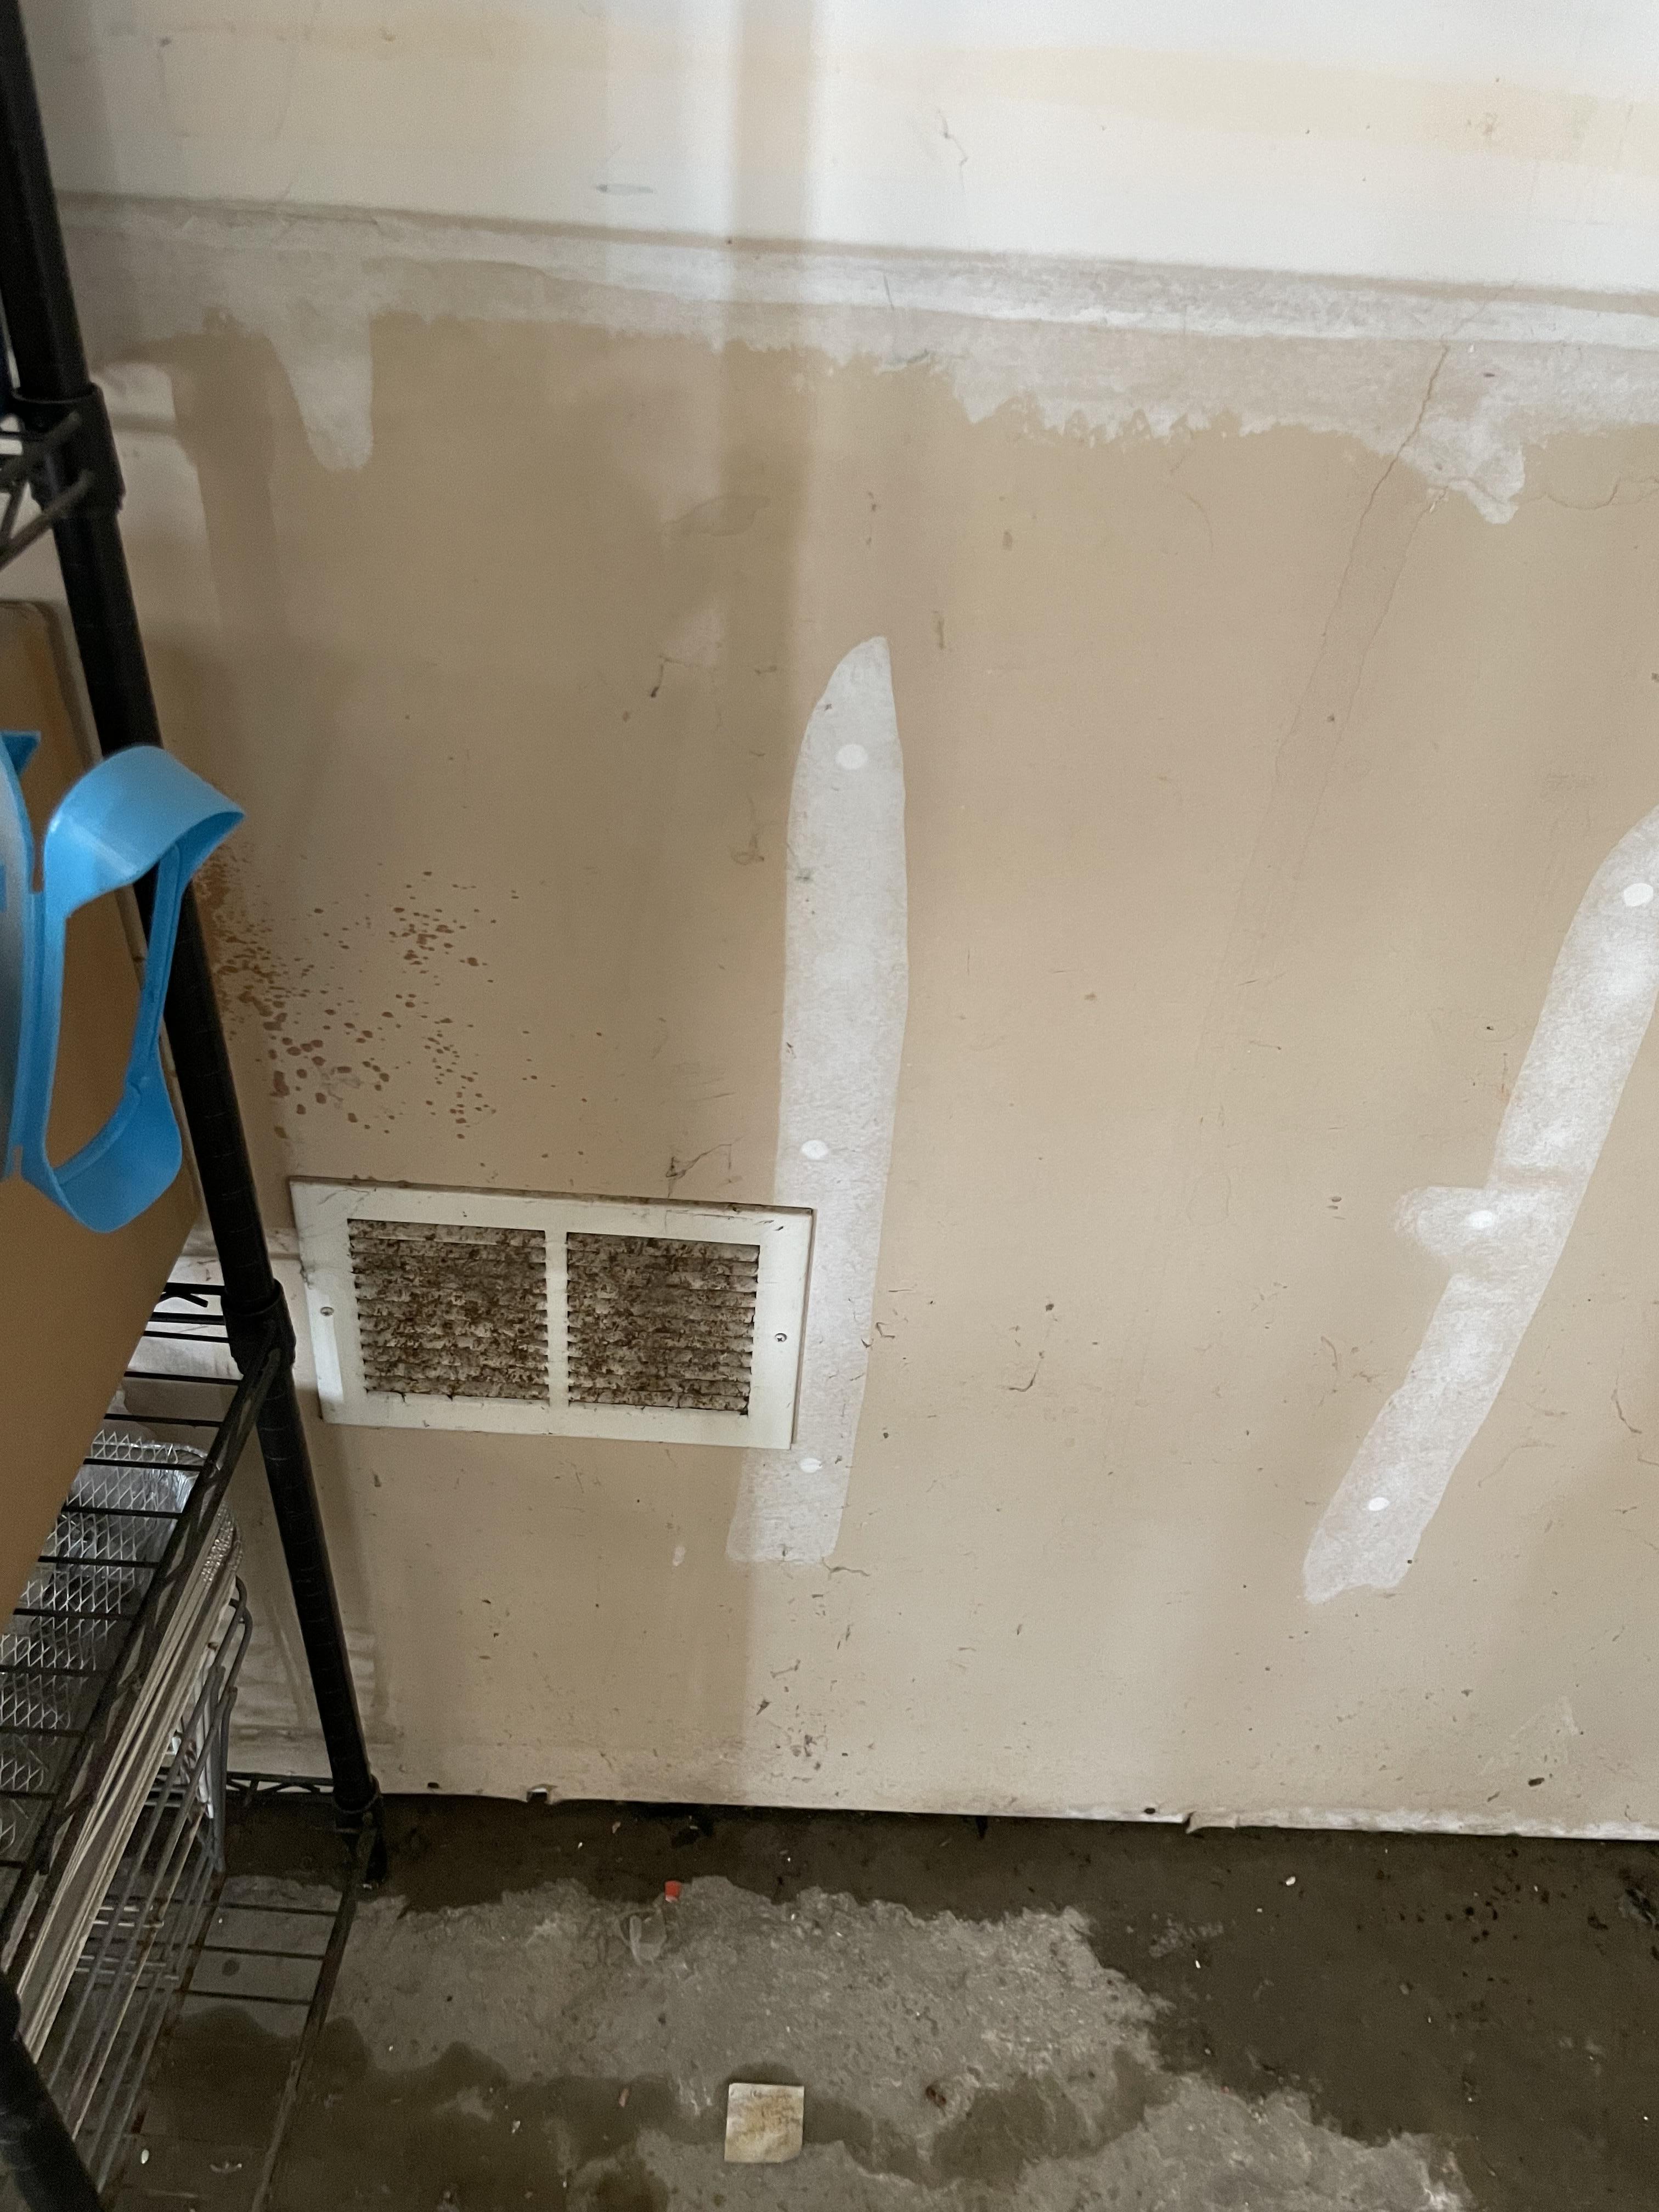 Mold growth on heating vent